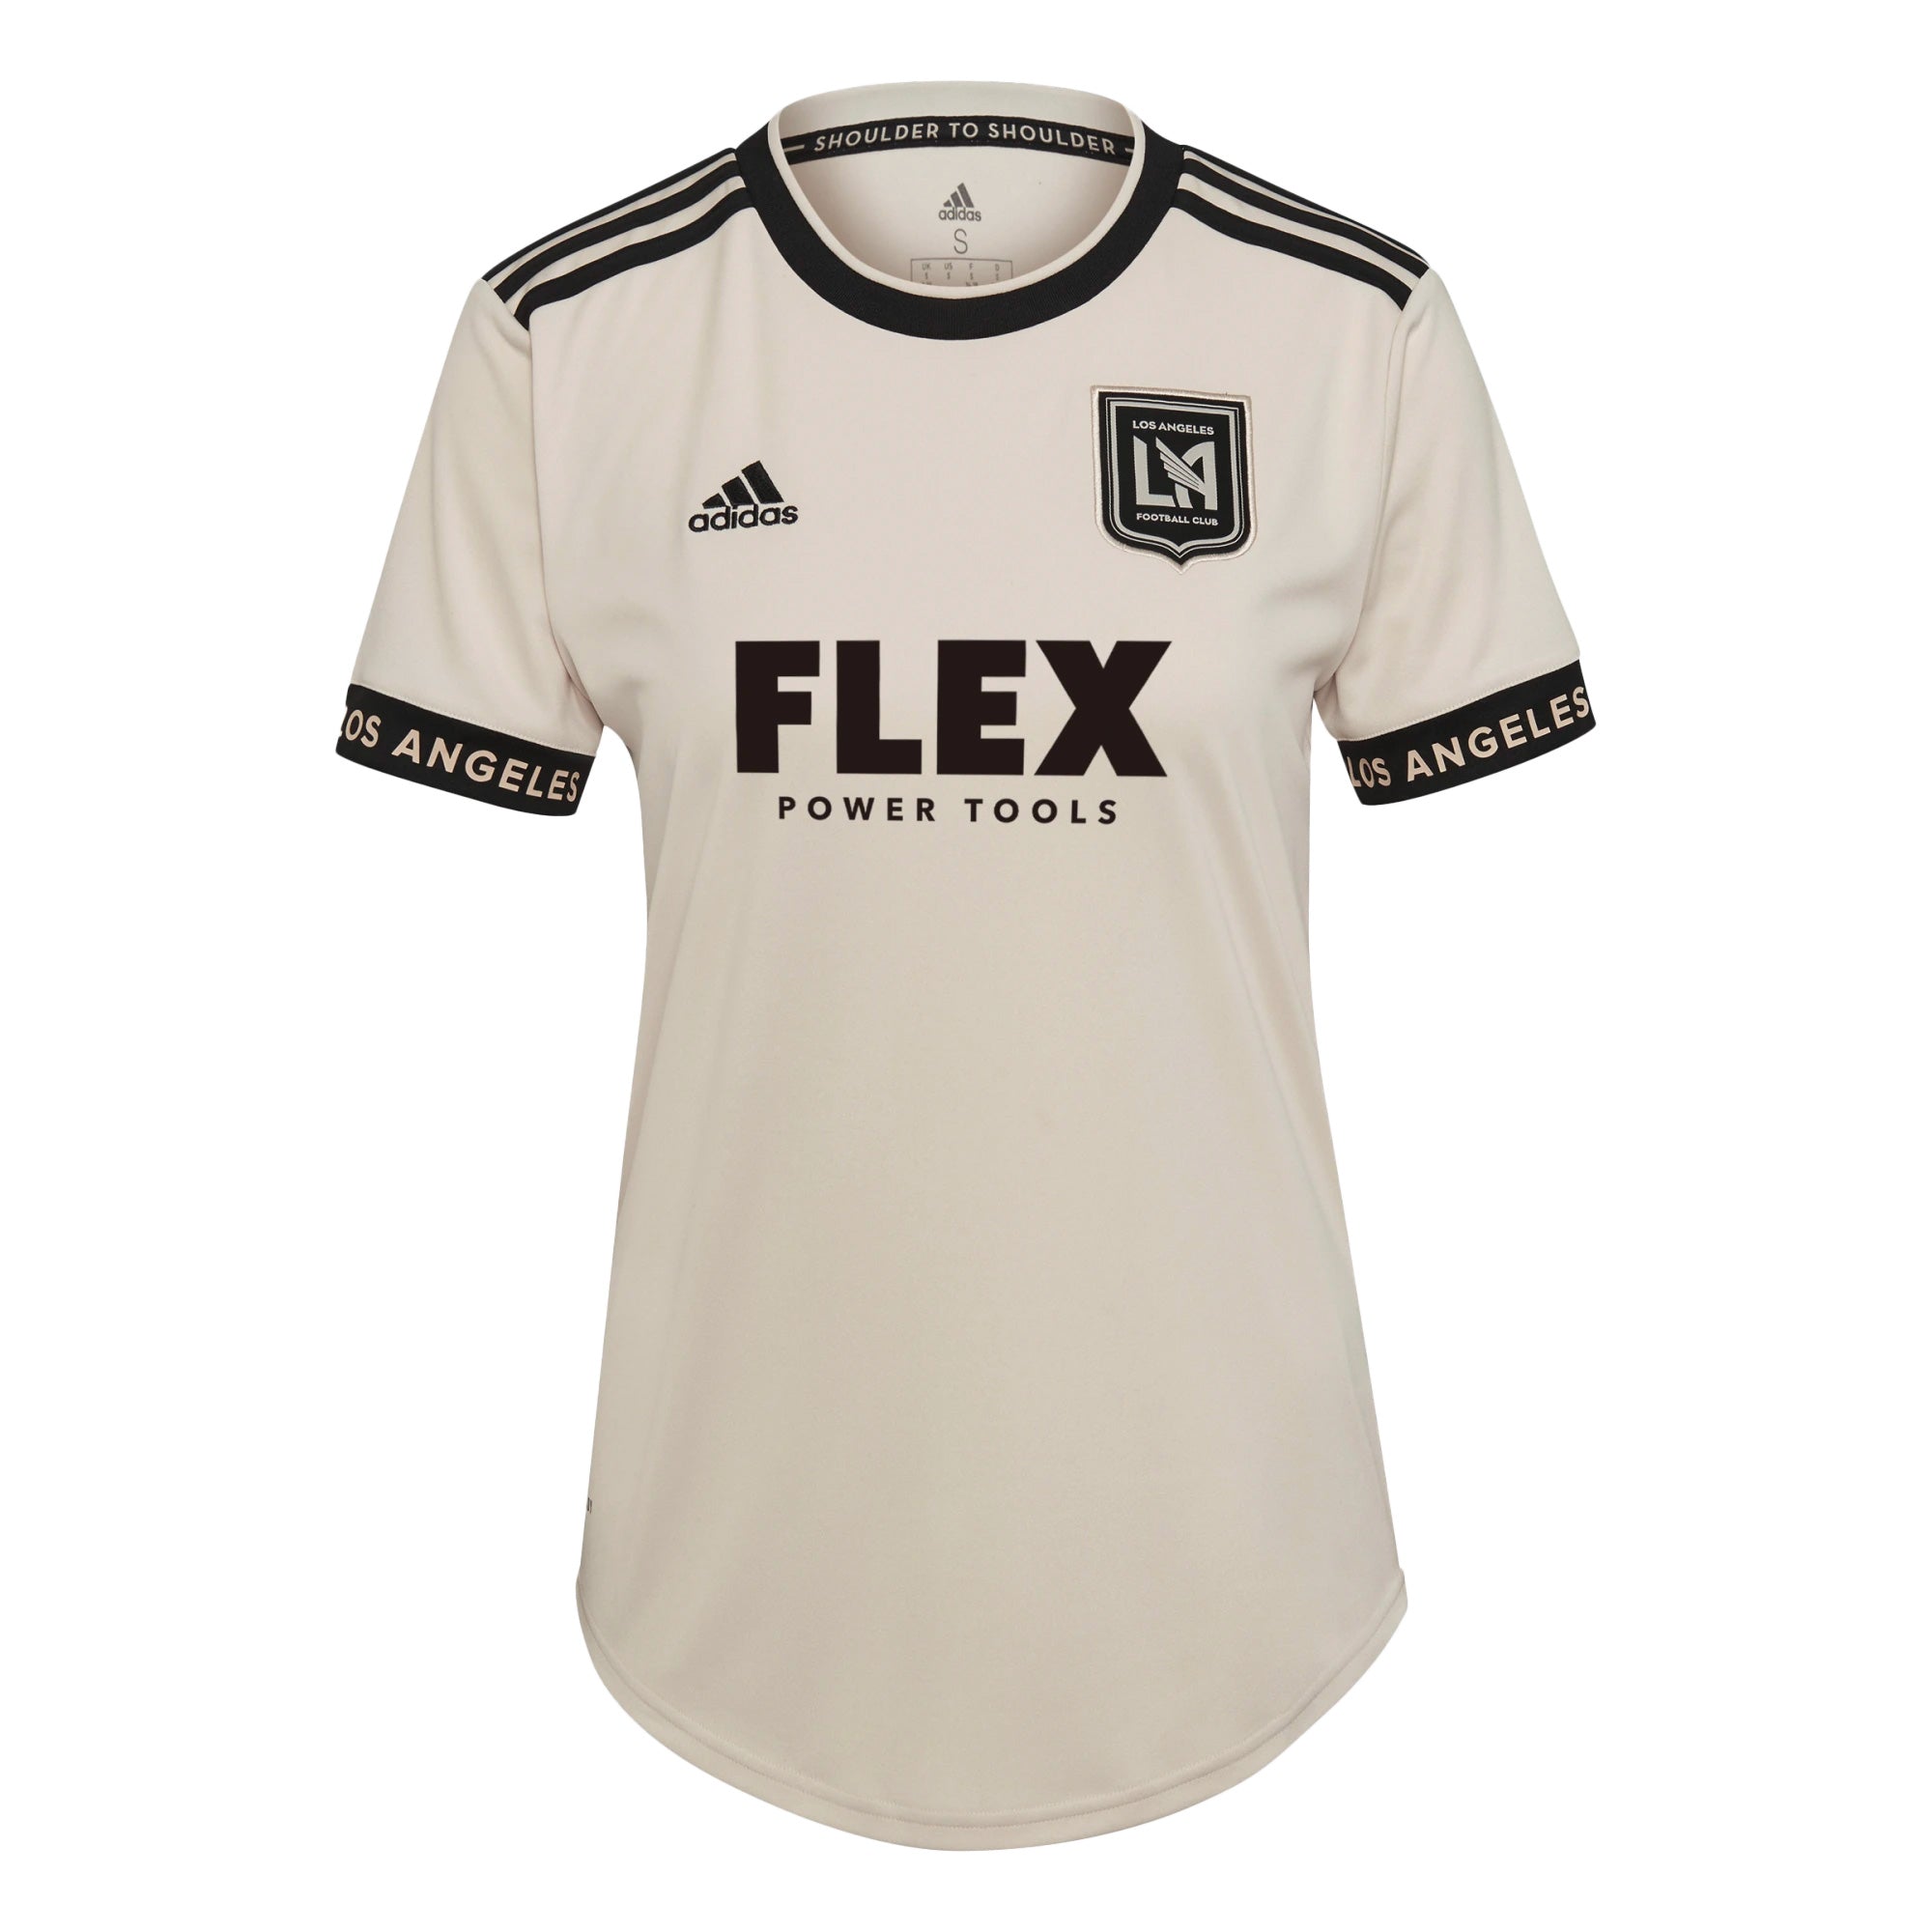 LAFC Launch 2021 adidas Secondary Jersey - SoccerBible